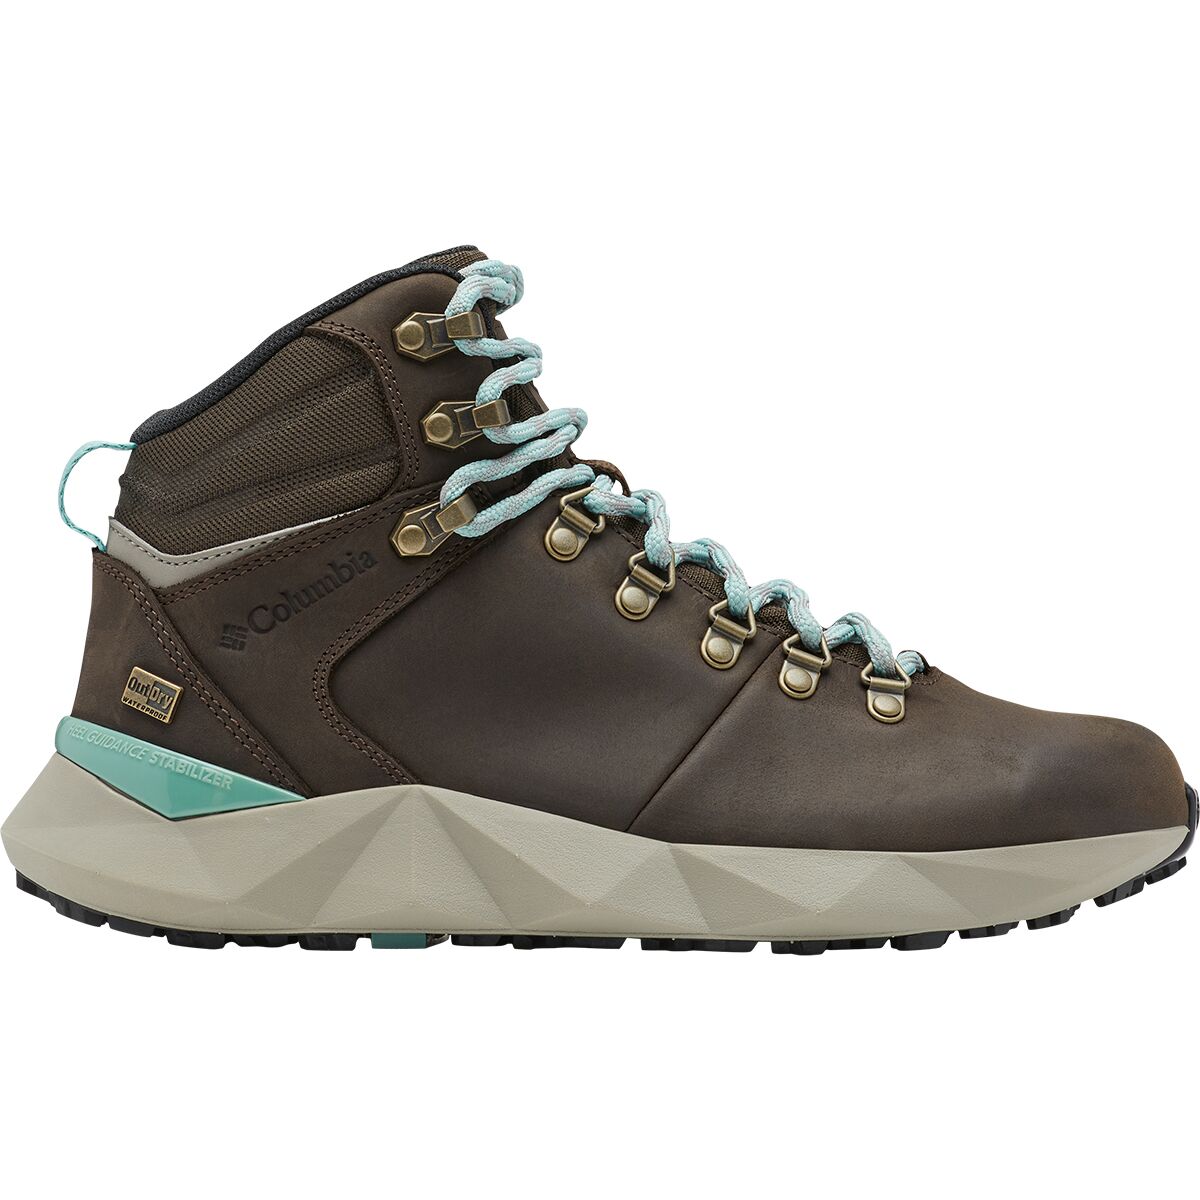 Columbia Facet Sierra Outdry Hiking Boot - Women's